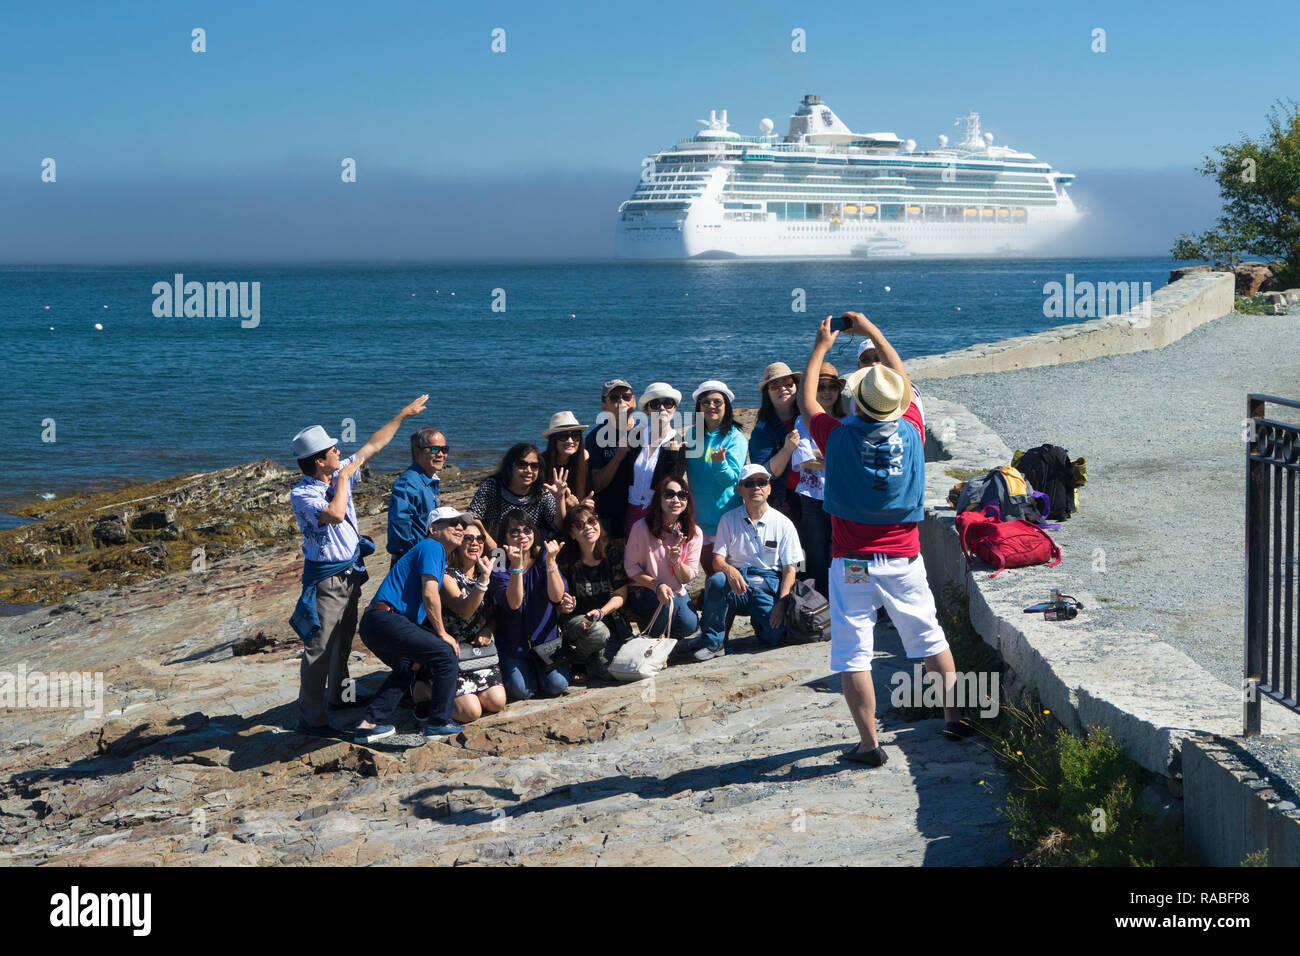 Asian tourists taking a group picture with a cruise ship in the background,  Bar Harbor, Maine, USA. Stock Photo